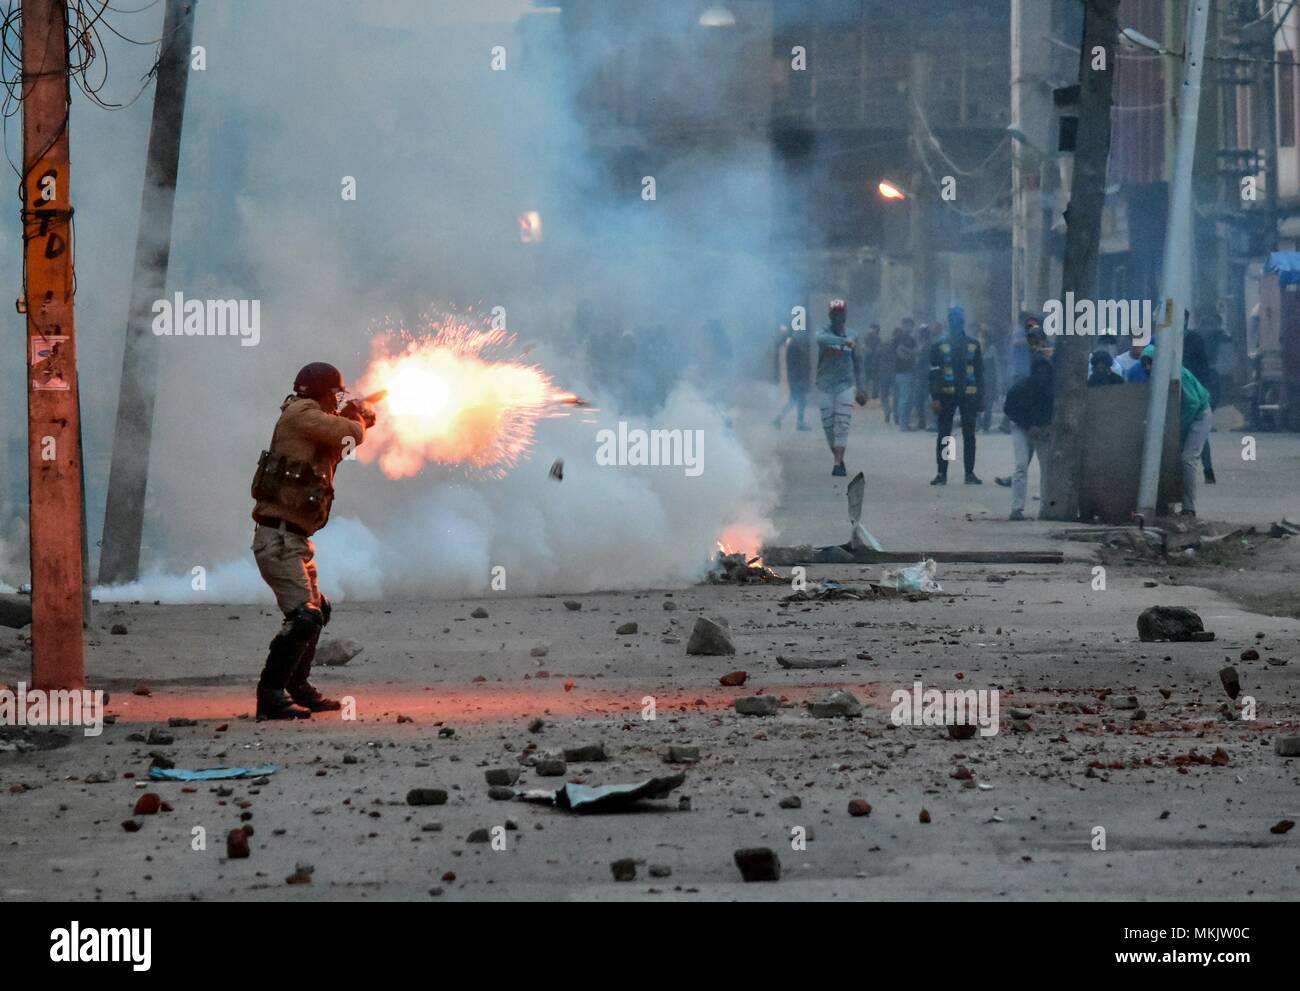 Srinagar, Kashmir, India. 8th May, 2018. An Indian policeman fire tear gas shell towards Kashmiri protesters during clashes over the killing of 11 people including 5 militants and 6 civilians. Police used tear smoke shells and shot gun pellets to disperse hundreds of demonstrators who hurled rocks and chanted anti-Indian and pro-freedom slogans. Credit: Saqib Majeed/SOPA Images/ZUMA Wire/Alamy Live News Stock Photo